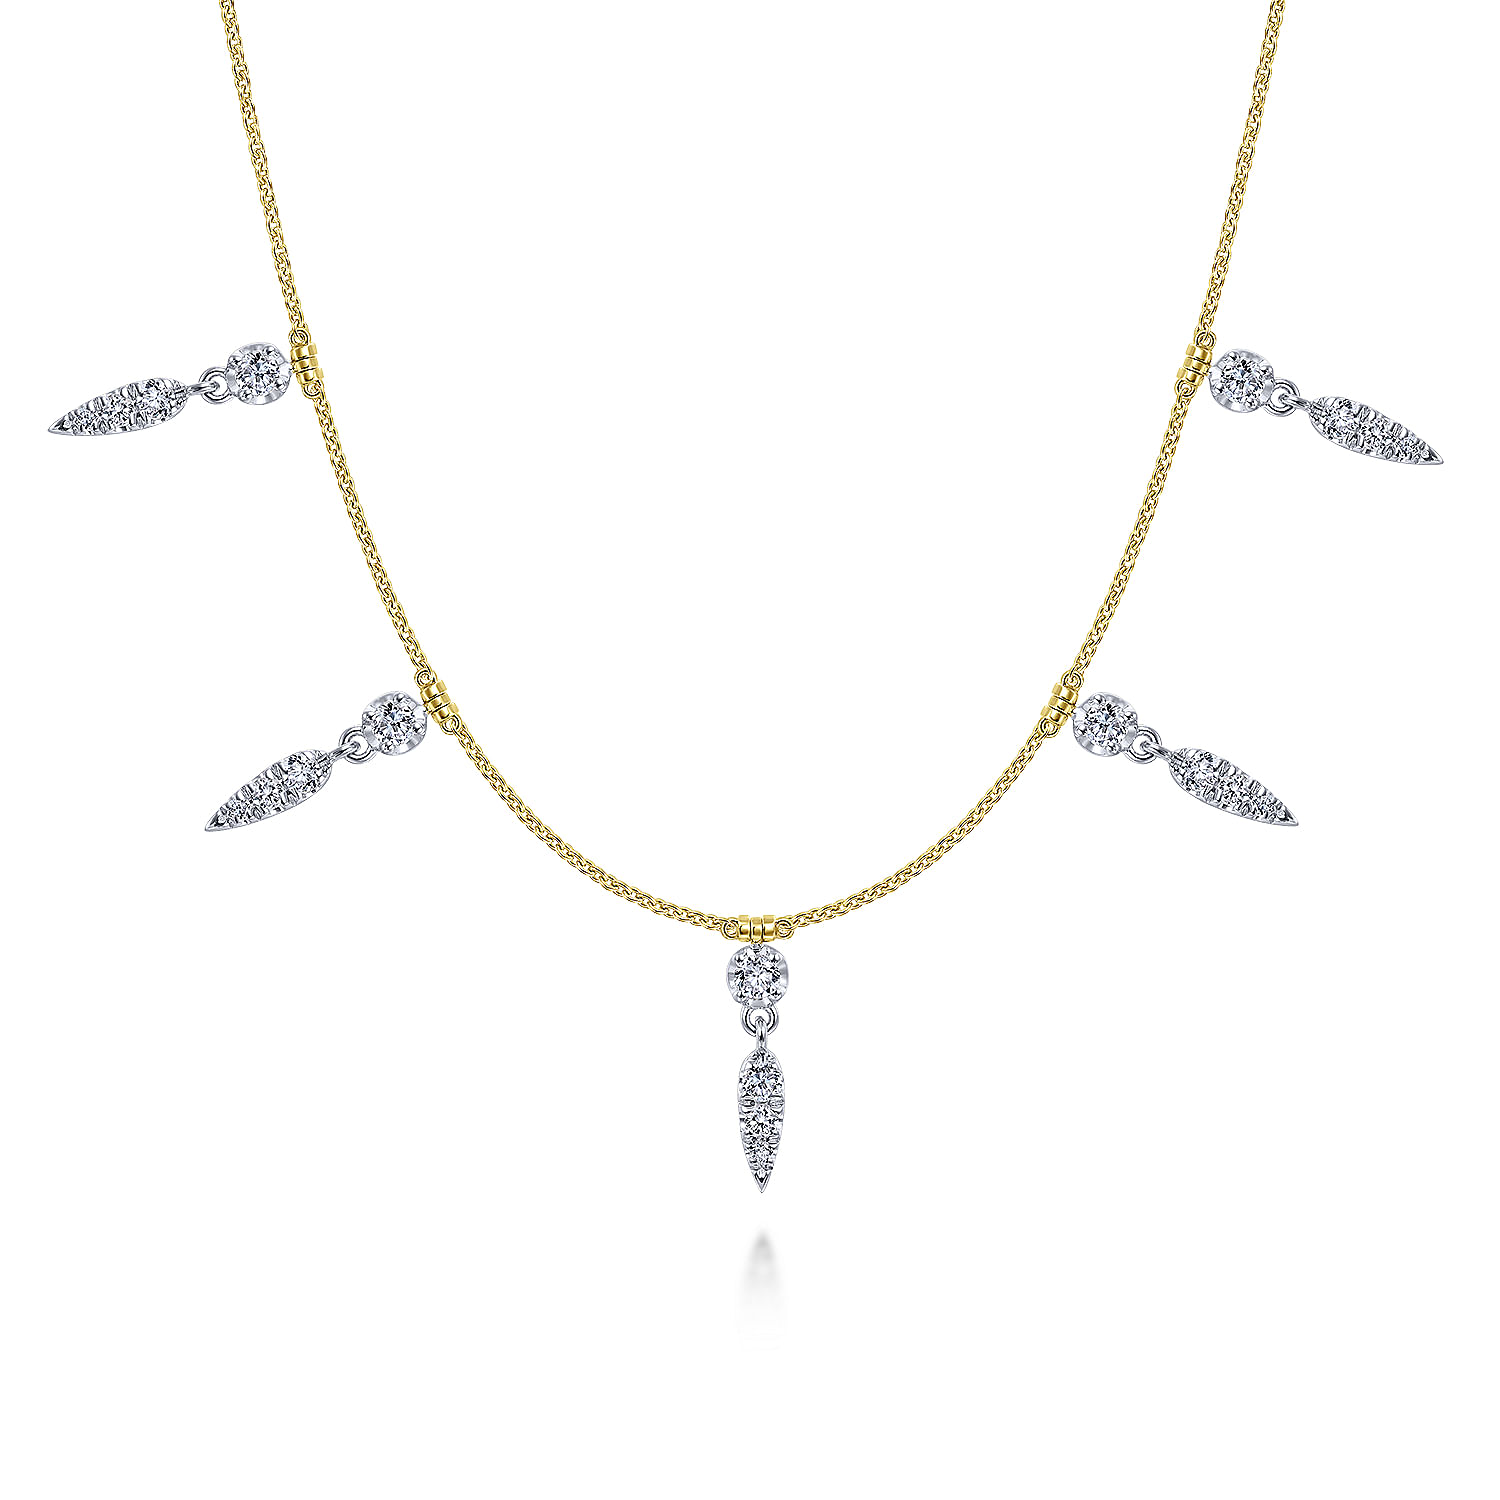 18 inch 14K Yellow Gold Chain Necklace with Diamond Spike Stations